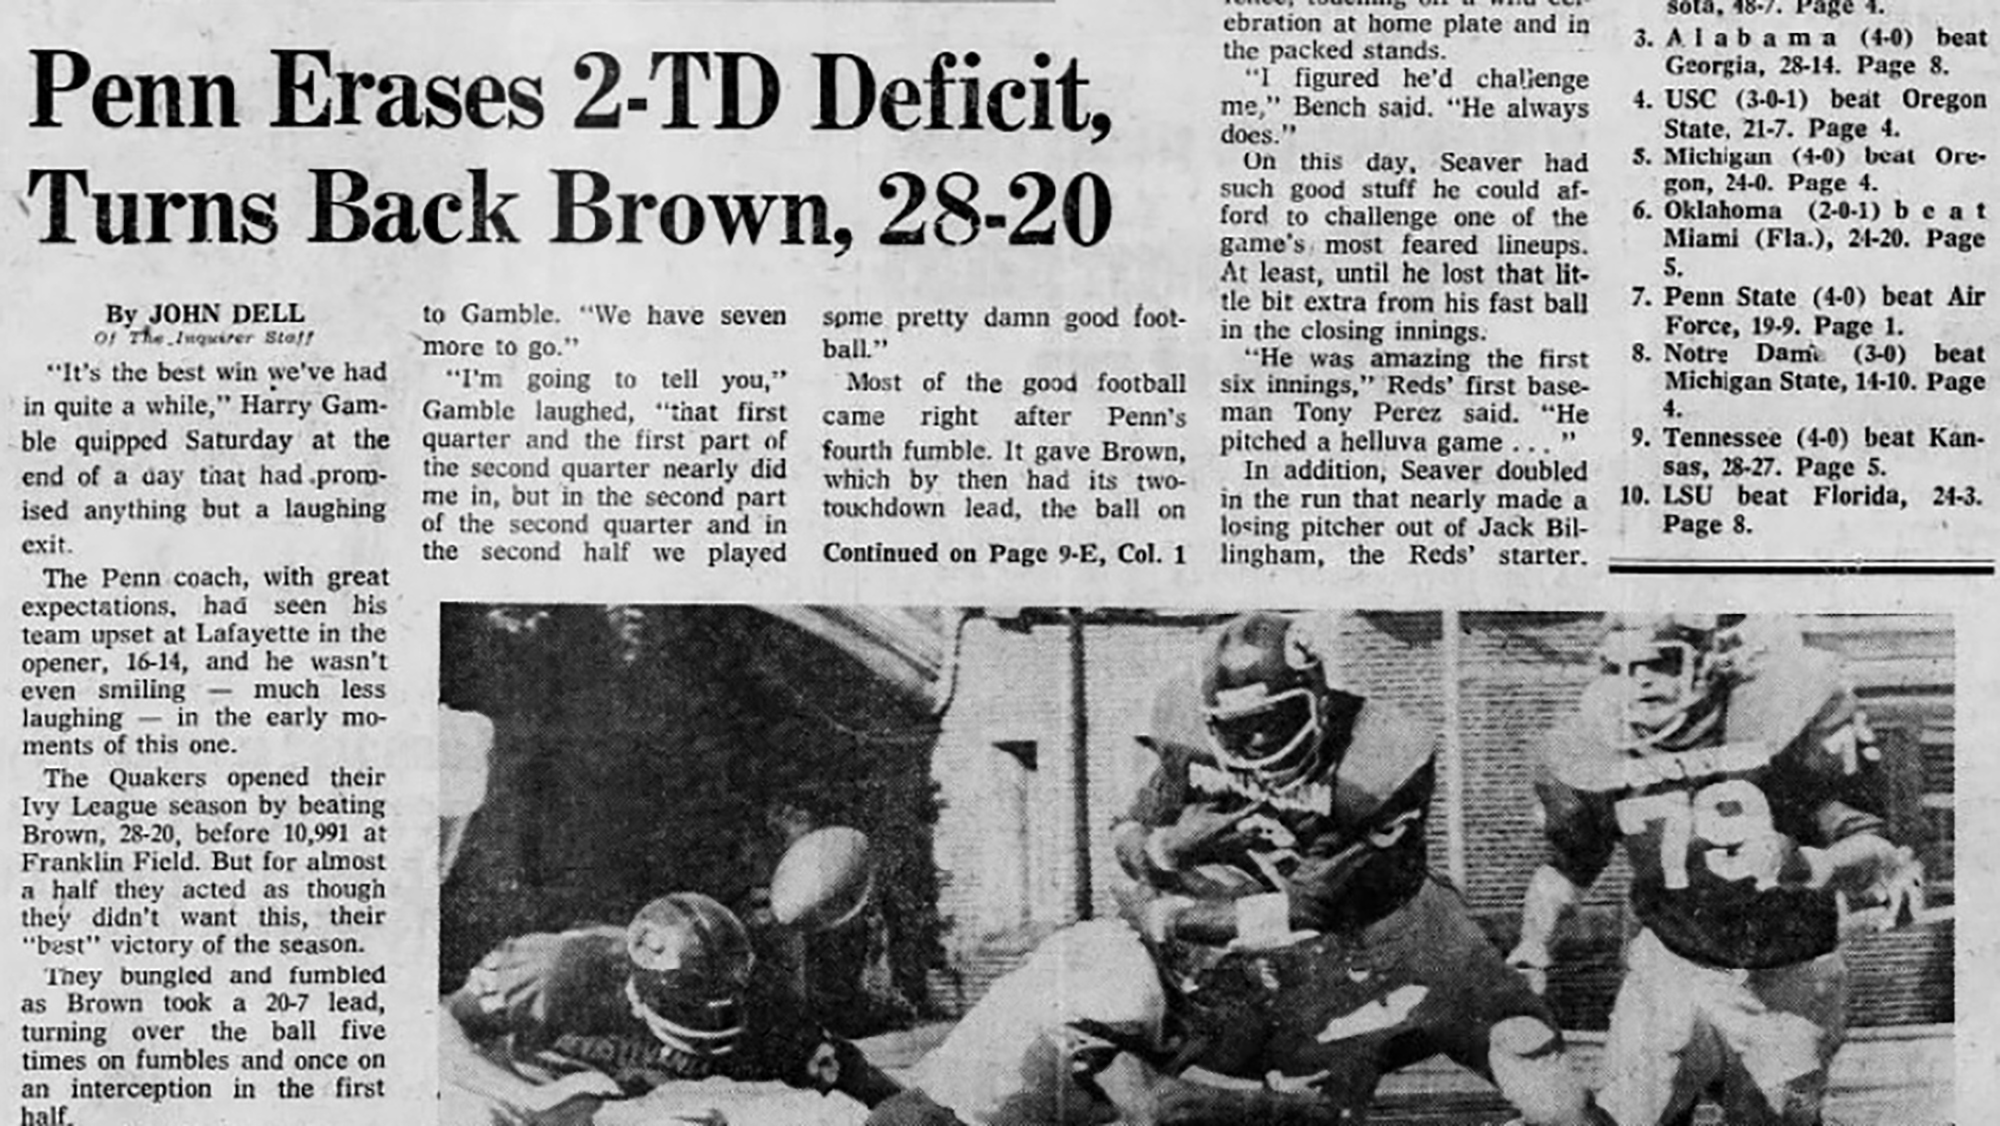 An article about the 1973 Penn vs. Brown game on the front page of the sports section in the Sunday, Oct. 7, 1973, edition of The Philadelphia Inquirer